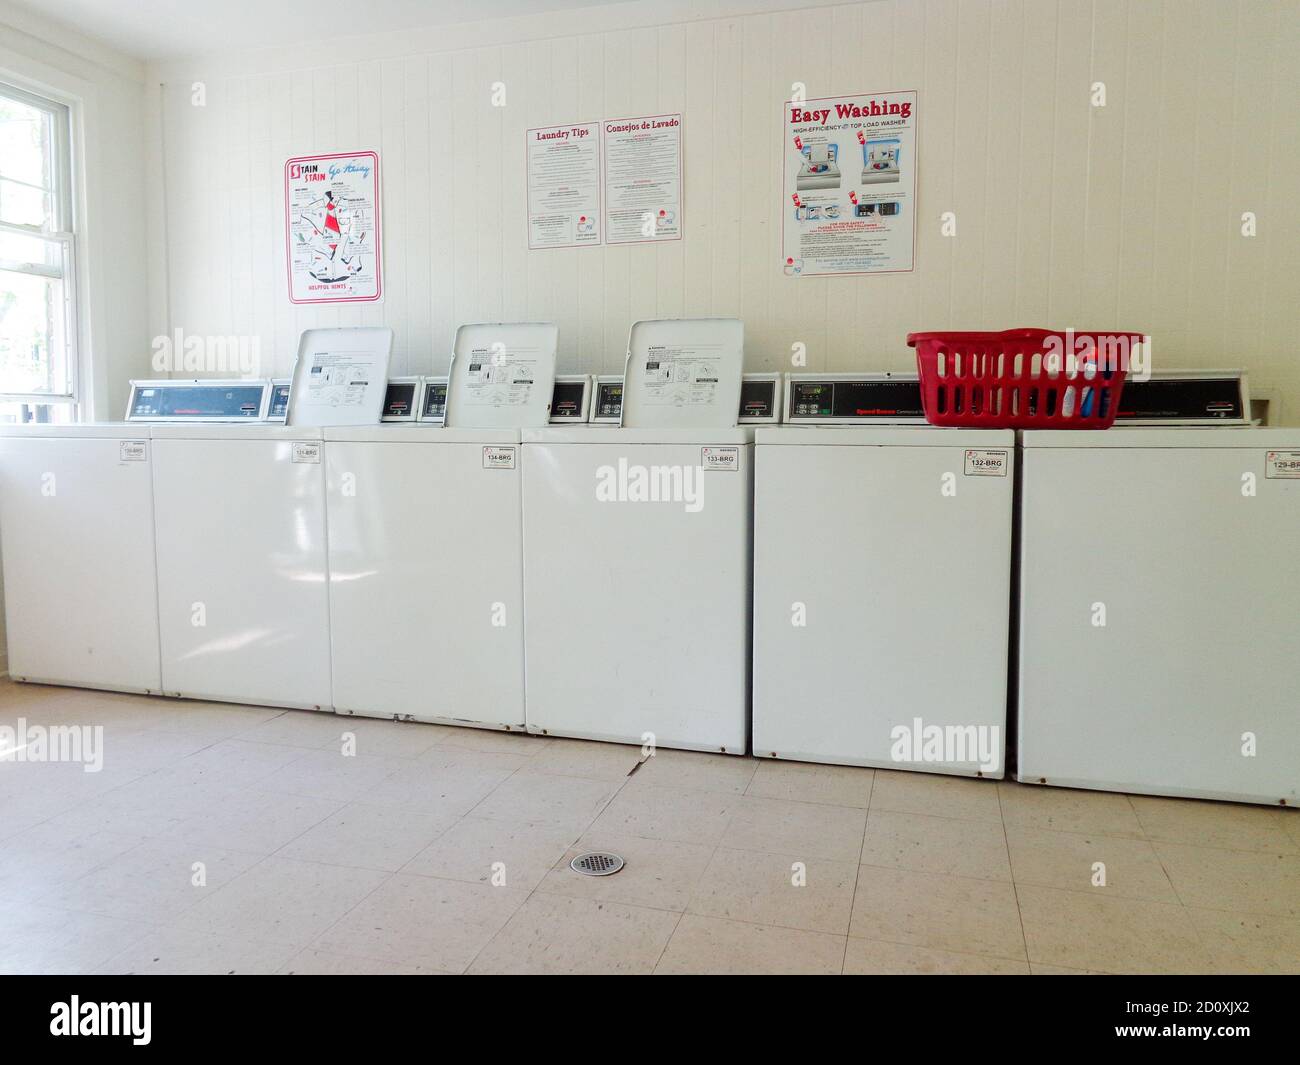 Washing machines and laundry basket in an apartment laundry room. Stock Photo